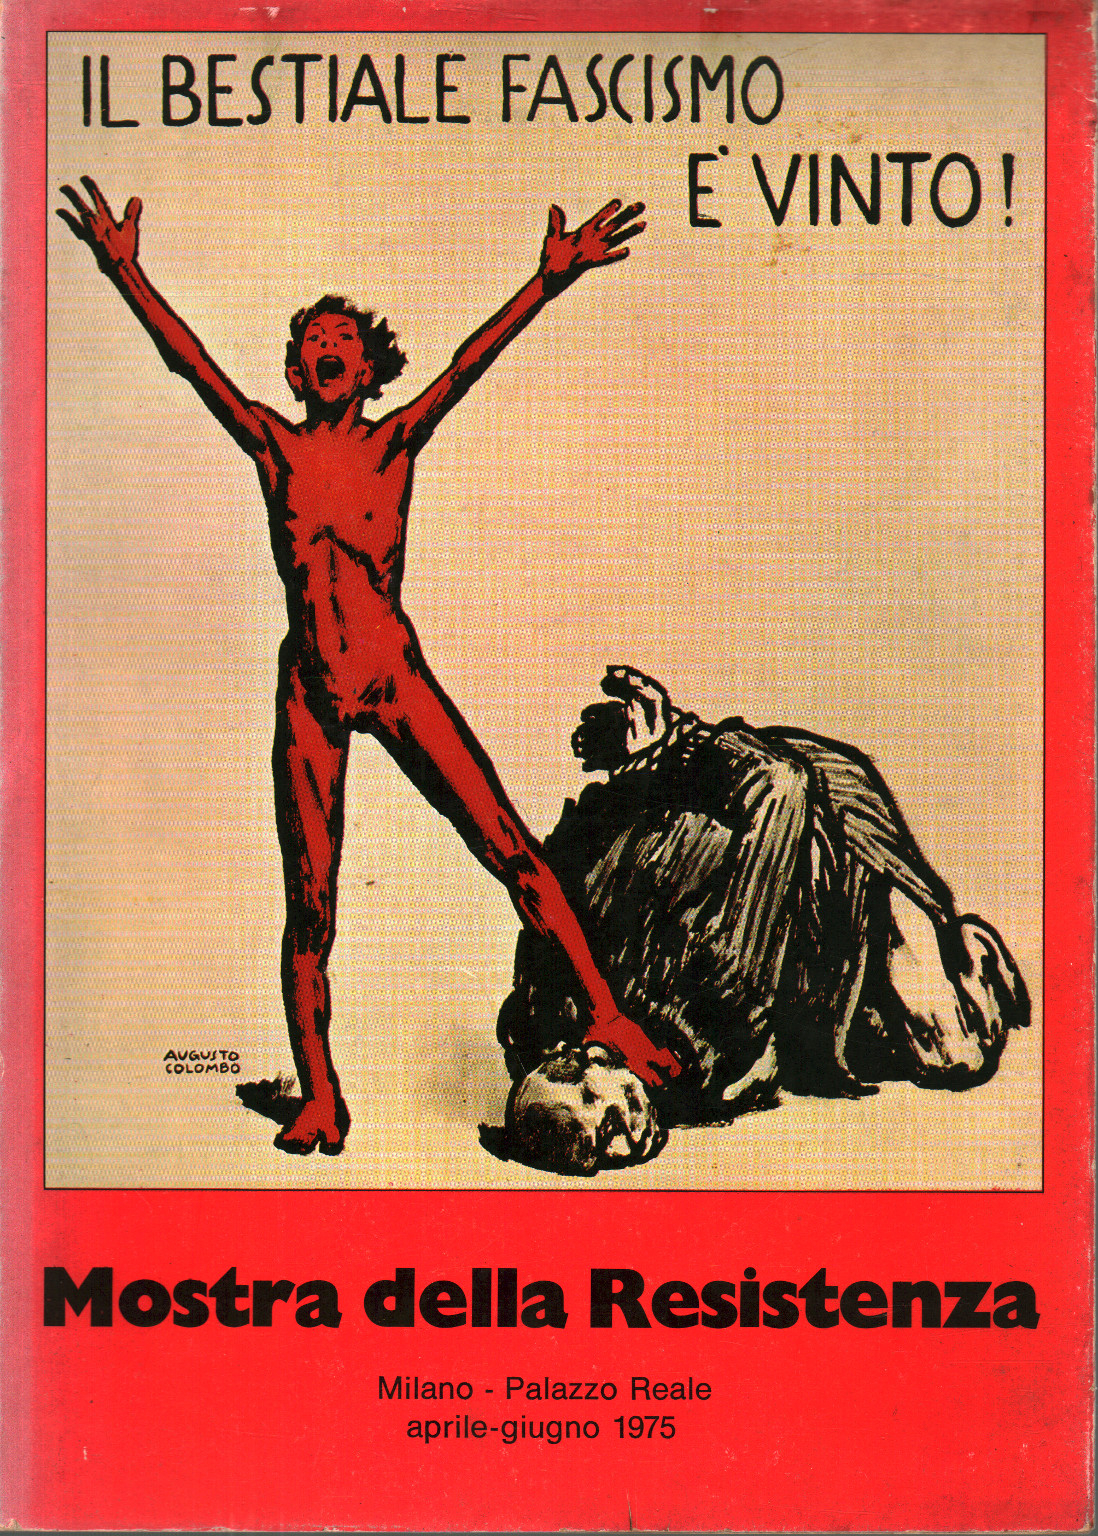 Exhibition of the Resistance, s.a.